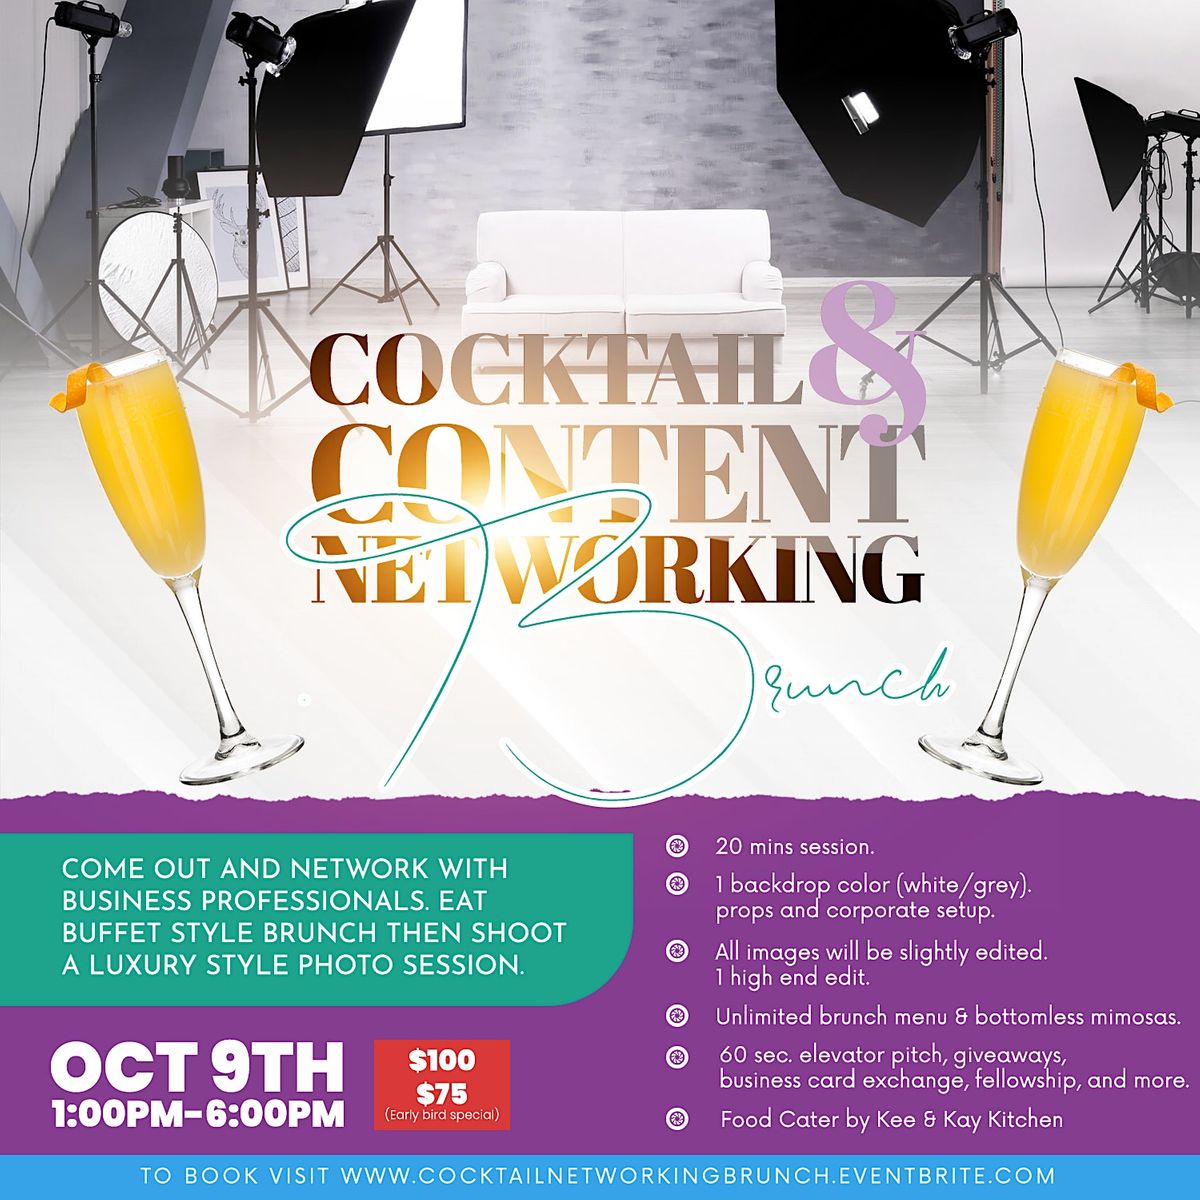 Cocktail & Networking Brunch